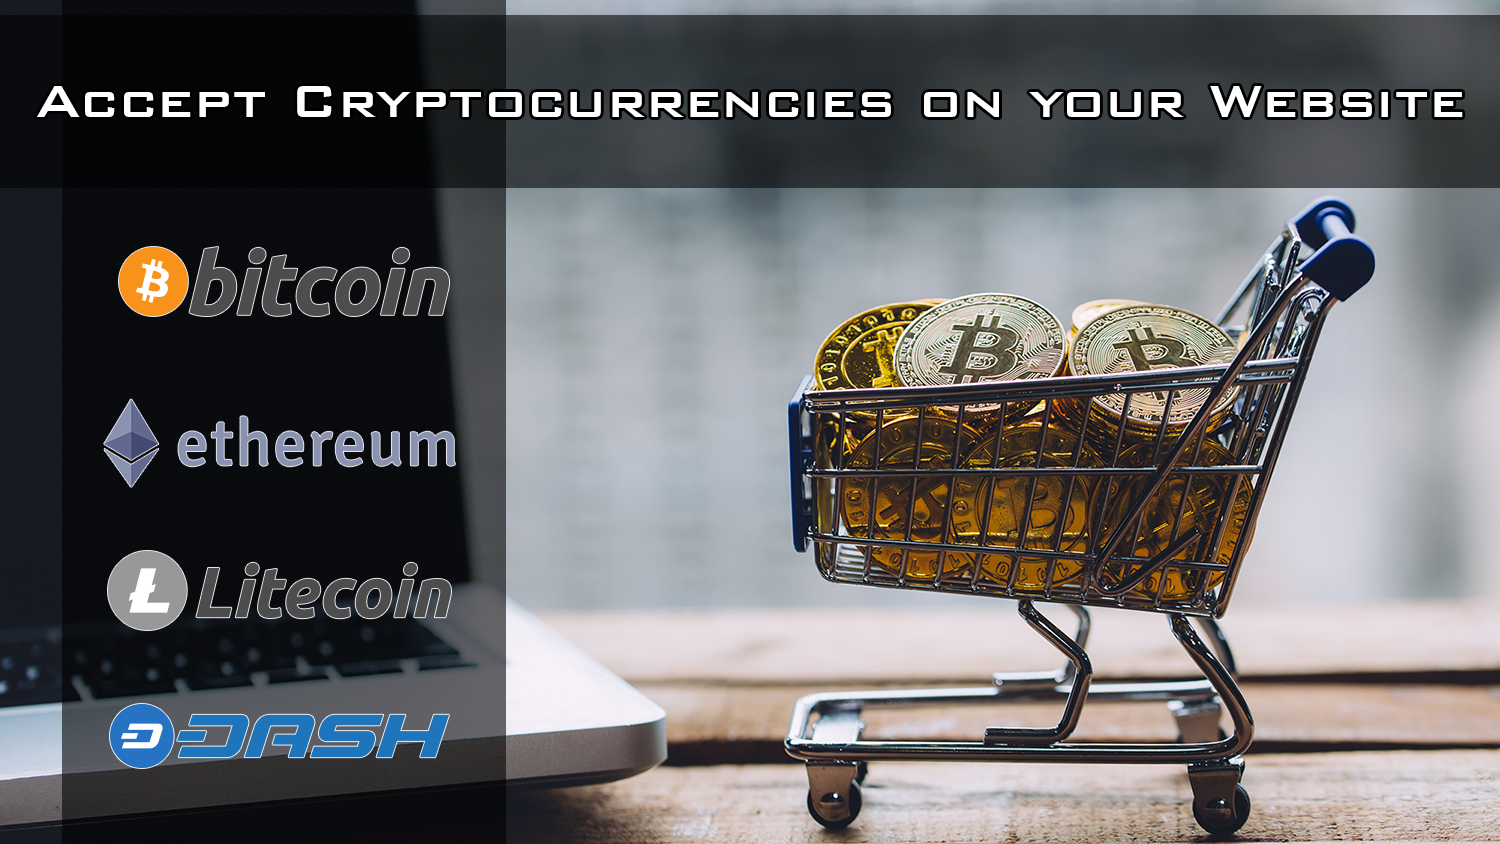 retailers that accept cryptocurrency